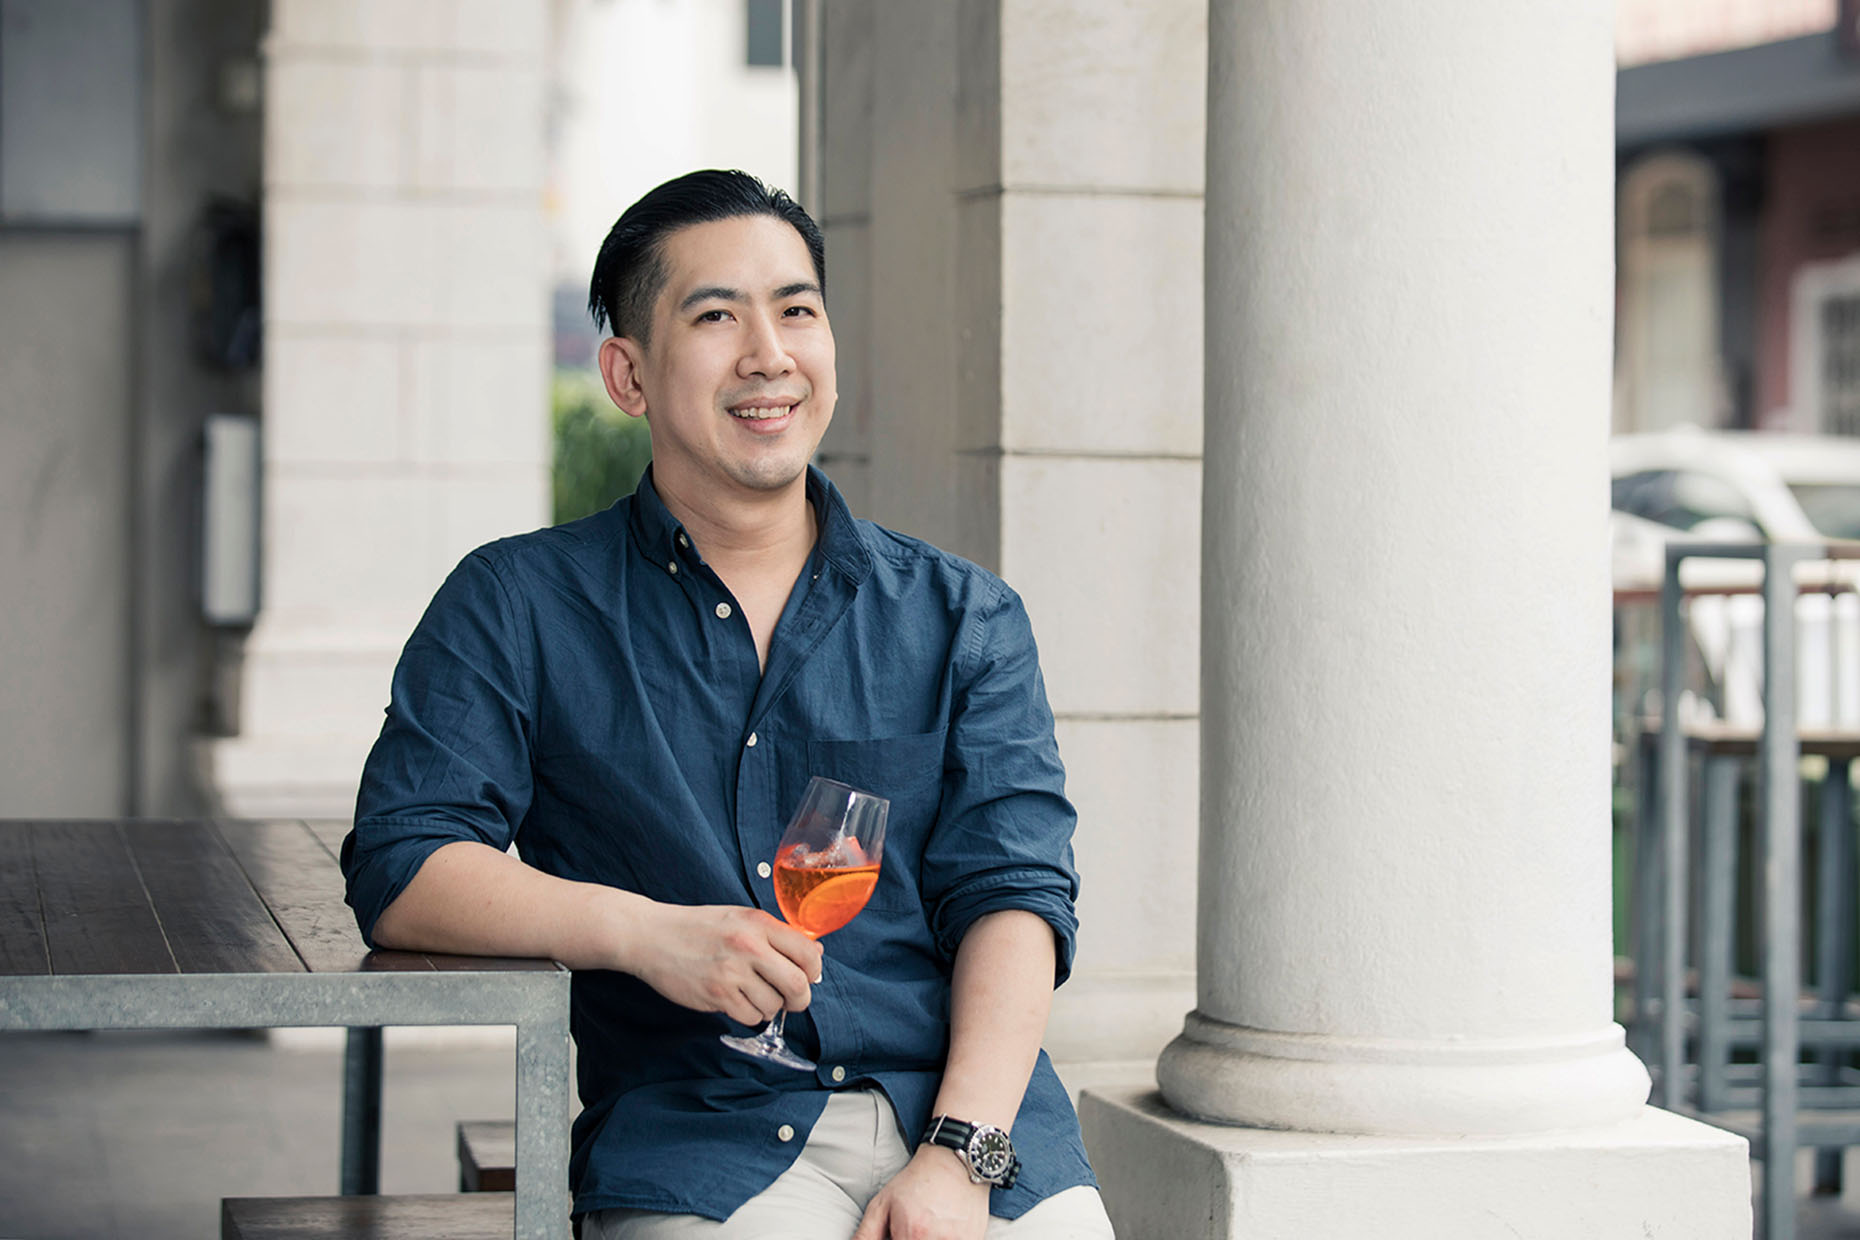 Executive Chef David Tang, formerly from Wolfgang Puck, believes food is the window into culture and identity, so it is important to understand the original before creating.